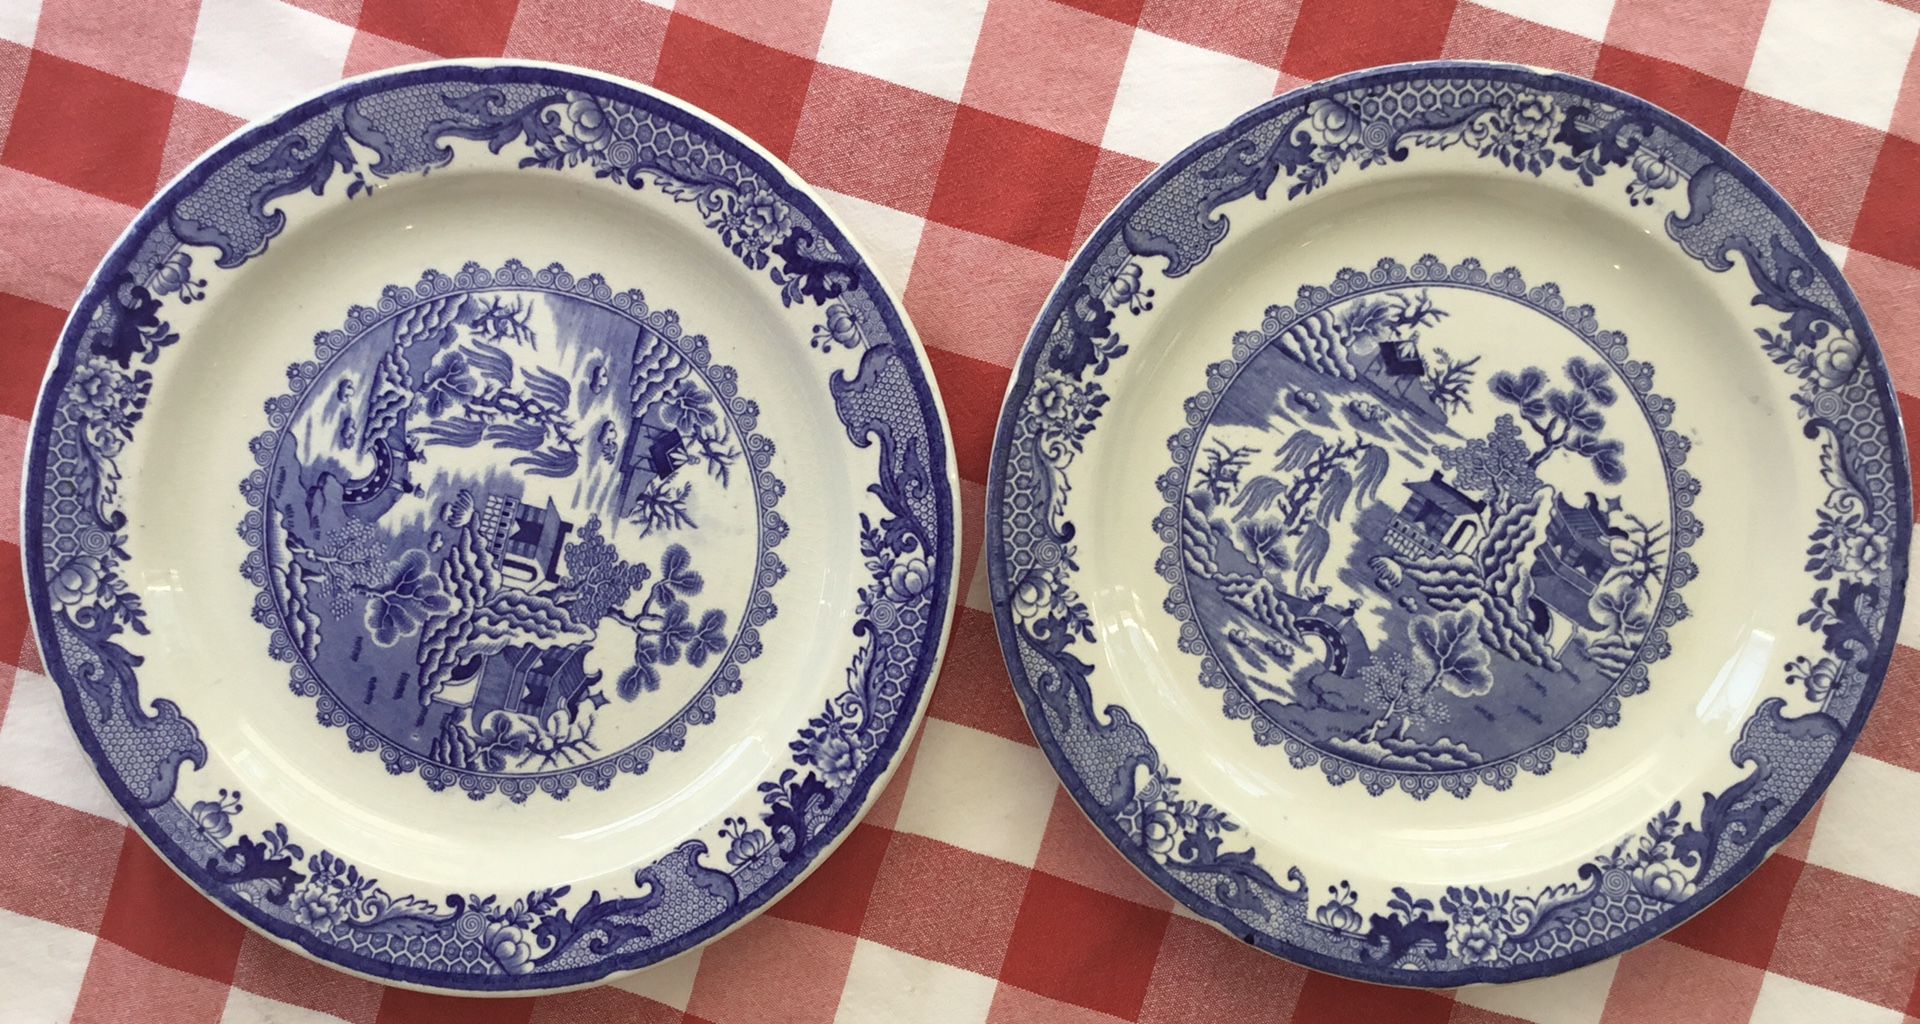 2 Antique Mason's Blue Willow Ironstone Dinner Plates 11.25”, Made in England